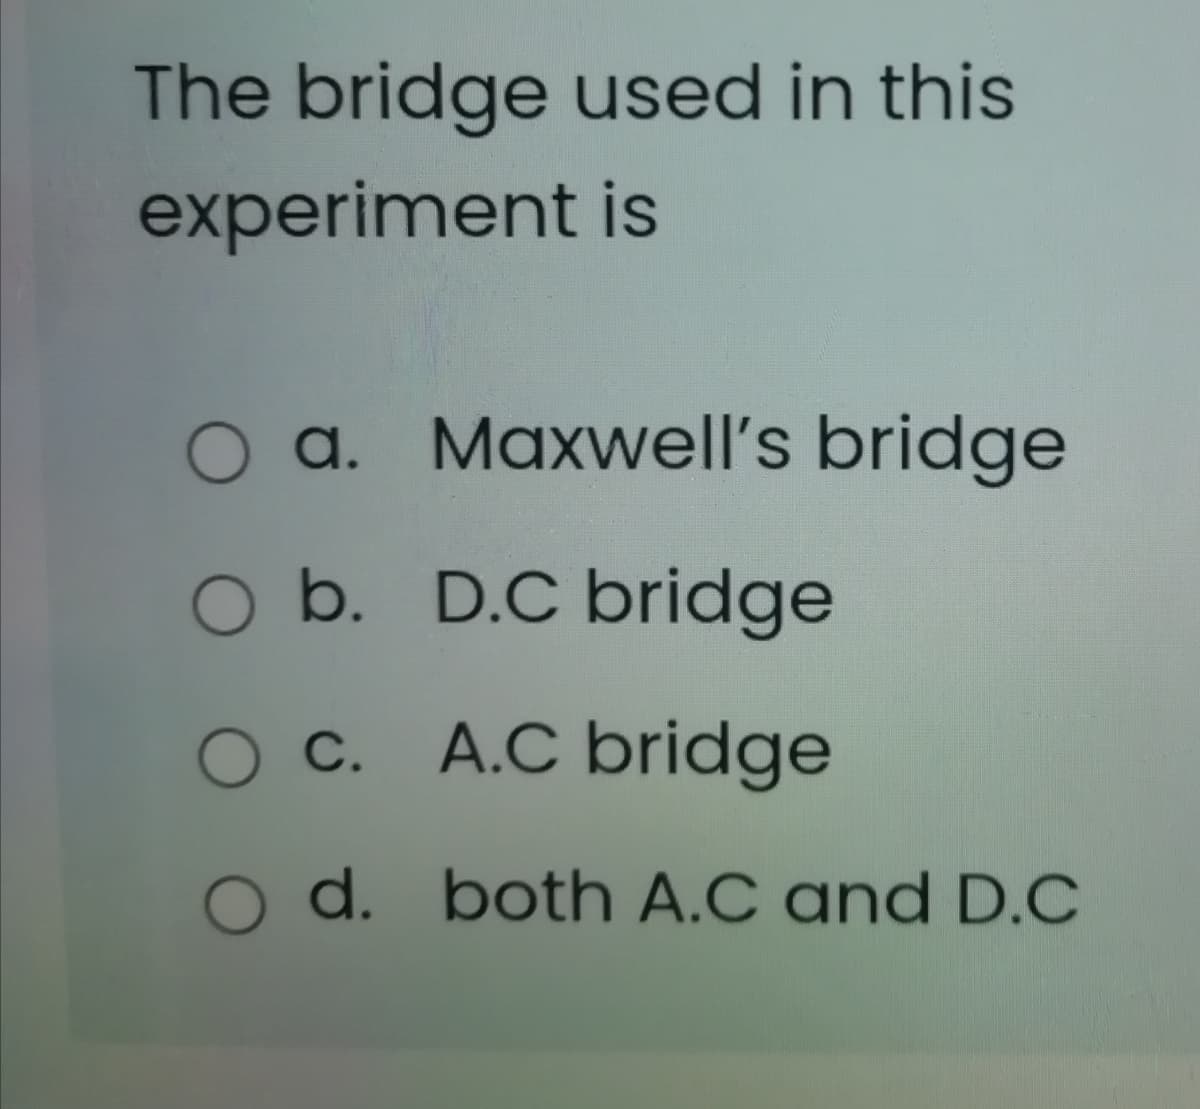 The bridge used in this
experiment is
O a. Maxwell's bridge
O b. D.C bridge
O C. A.C bridge
O d. both A.C and D.C
